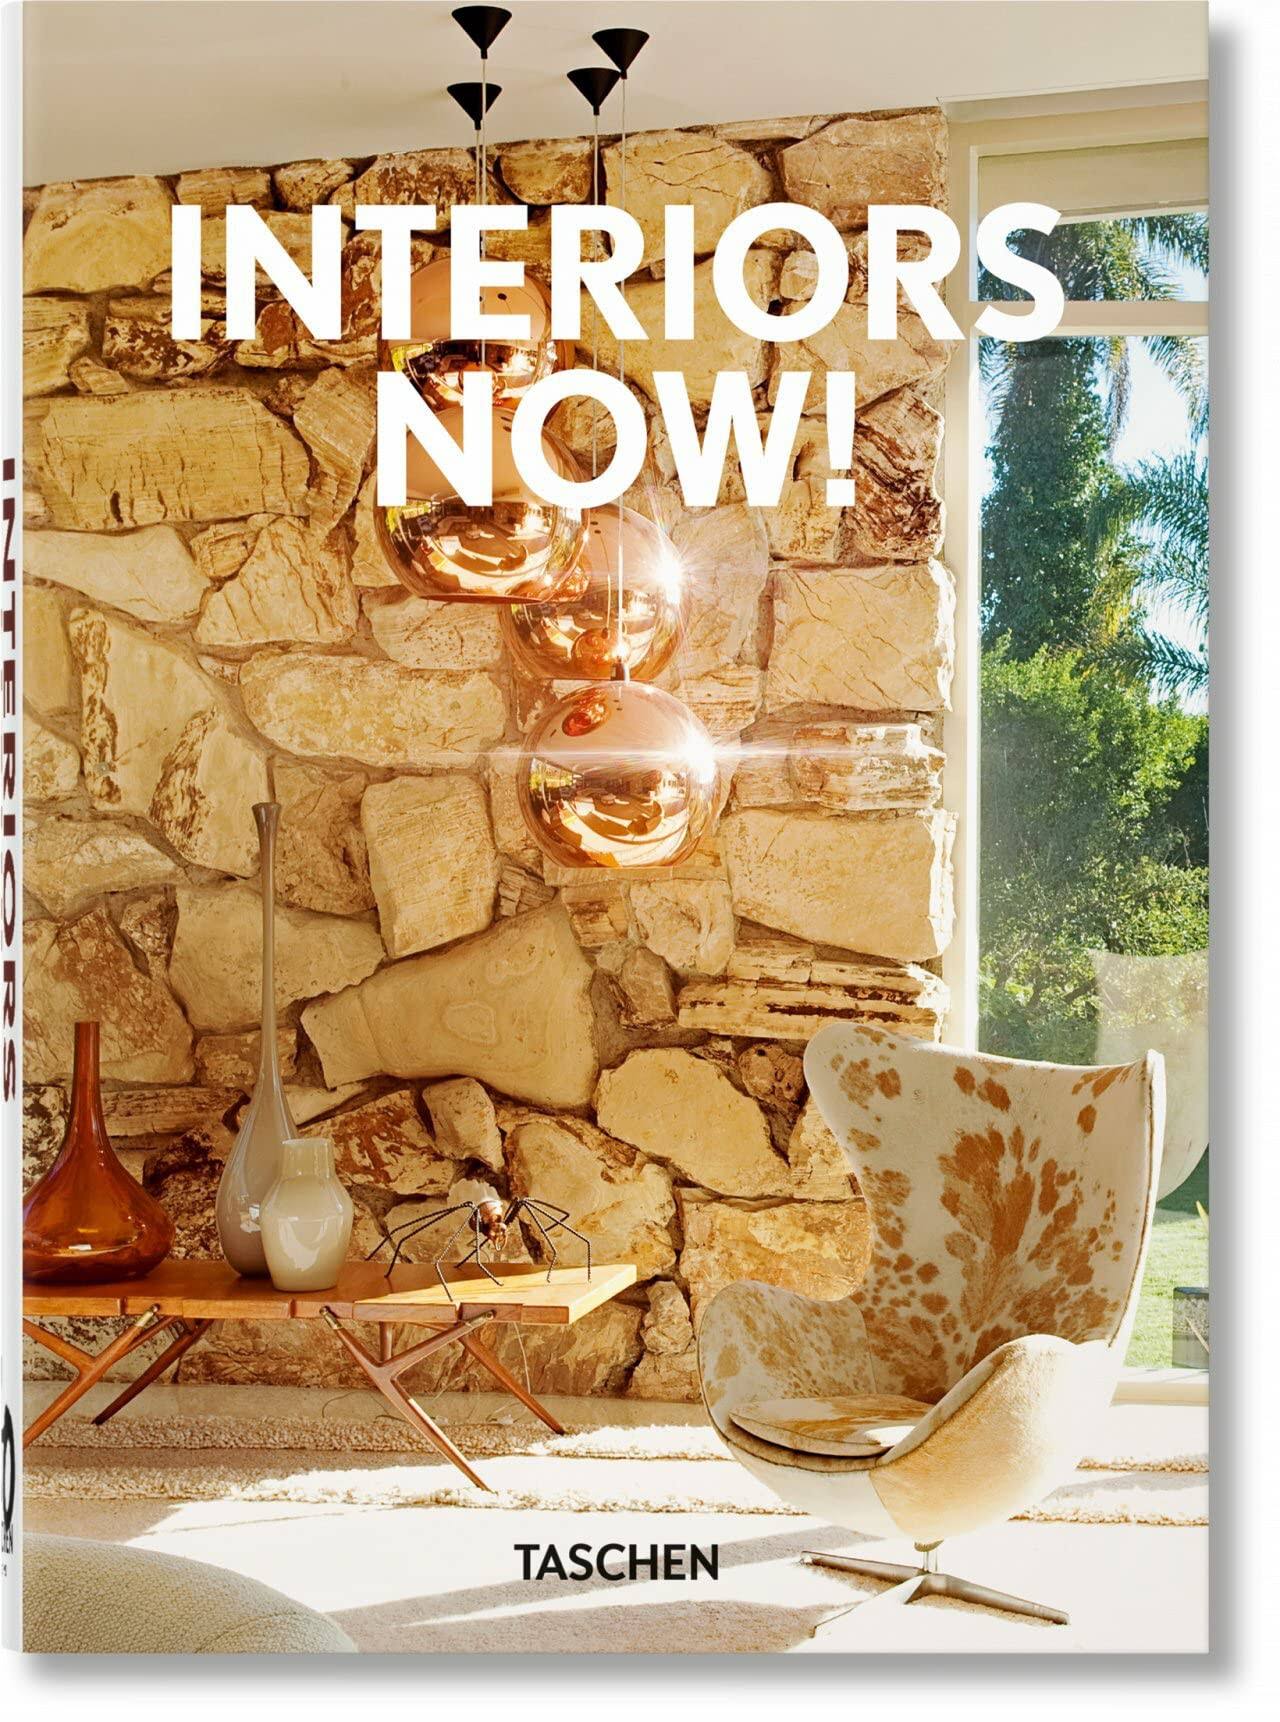 Interiors Now! 40th Ed. [Book]